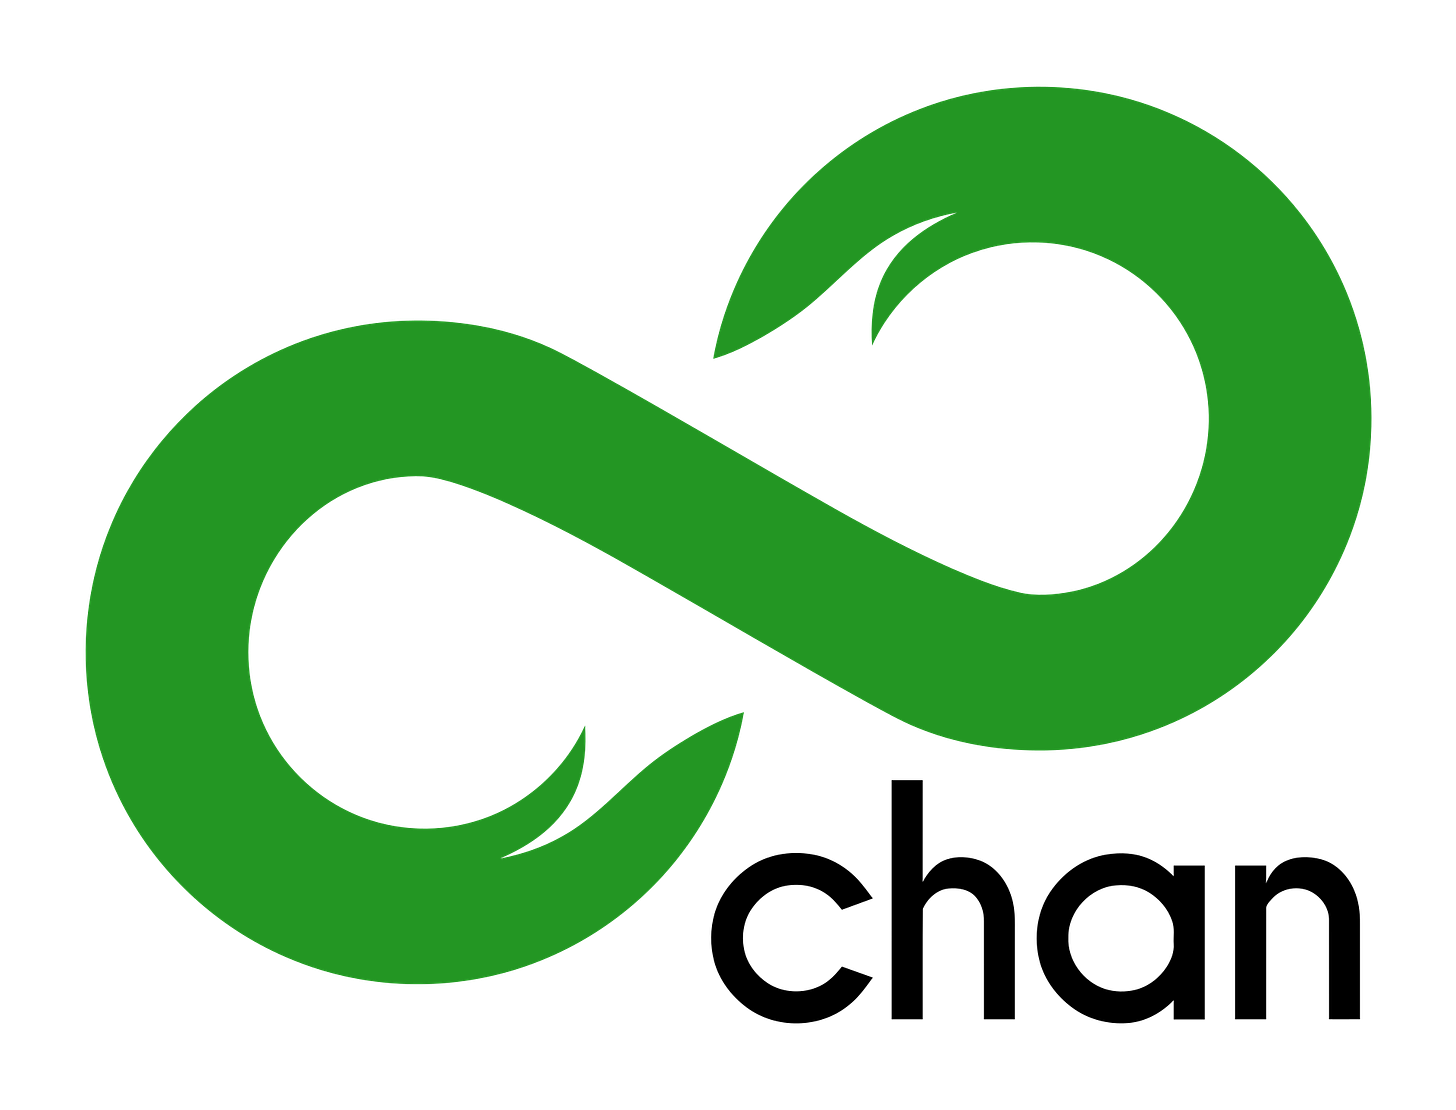 Green infinity symbol, with "chan" underneath in black lowercase sans serif text